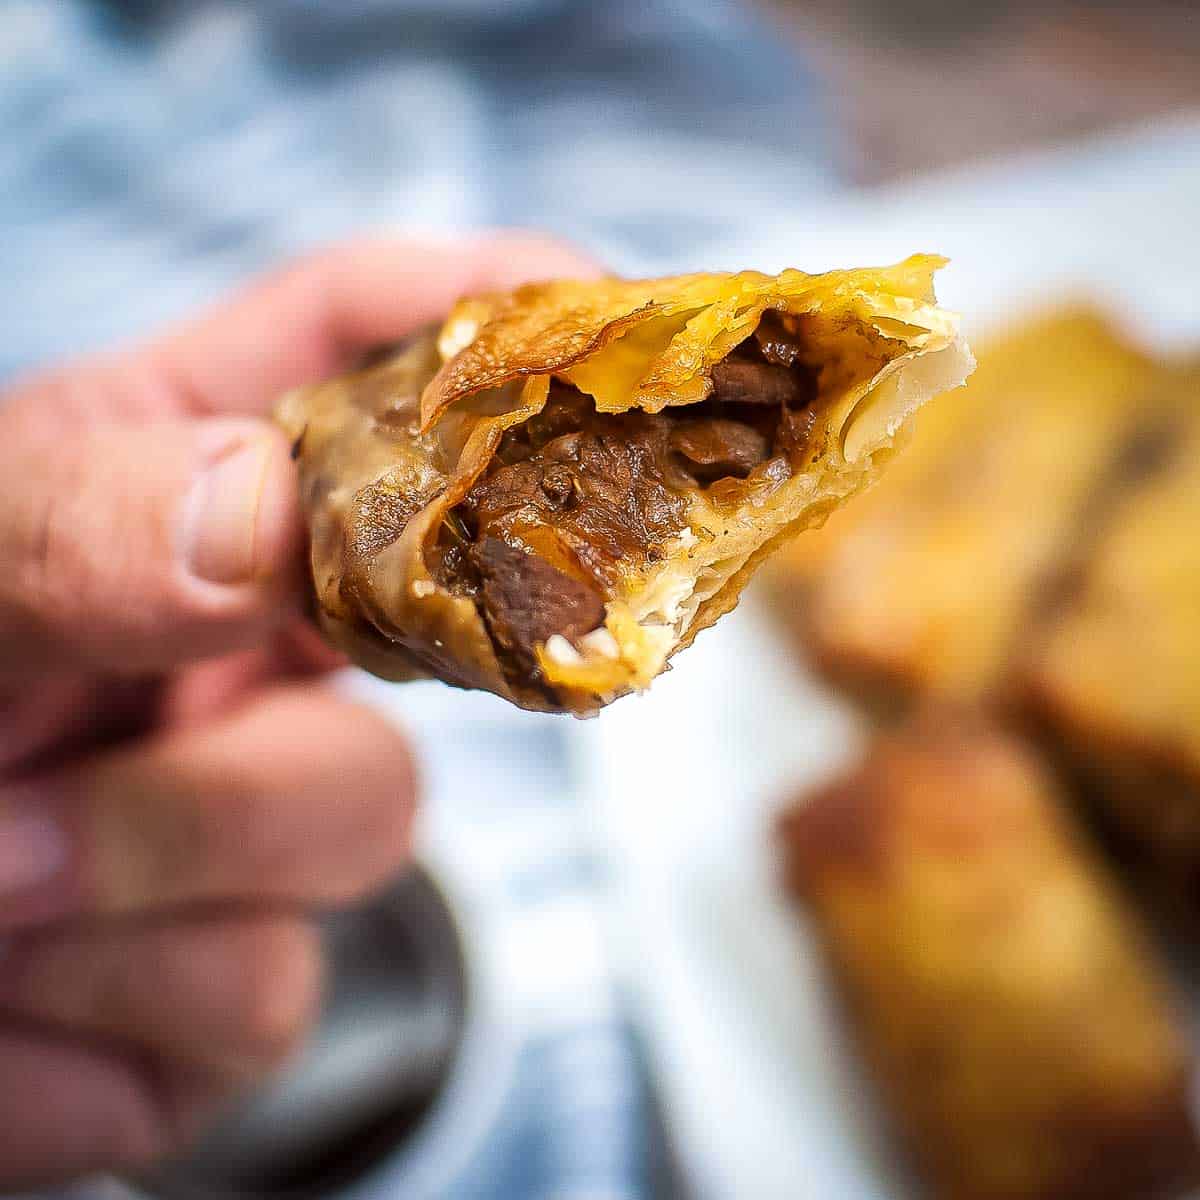 Close up shot of a hand showing the inside of an egg roll with more that are blurry in the background on a white plate.